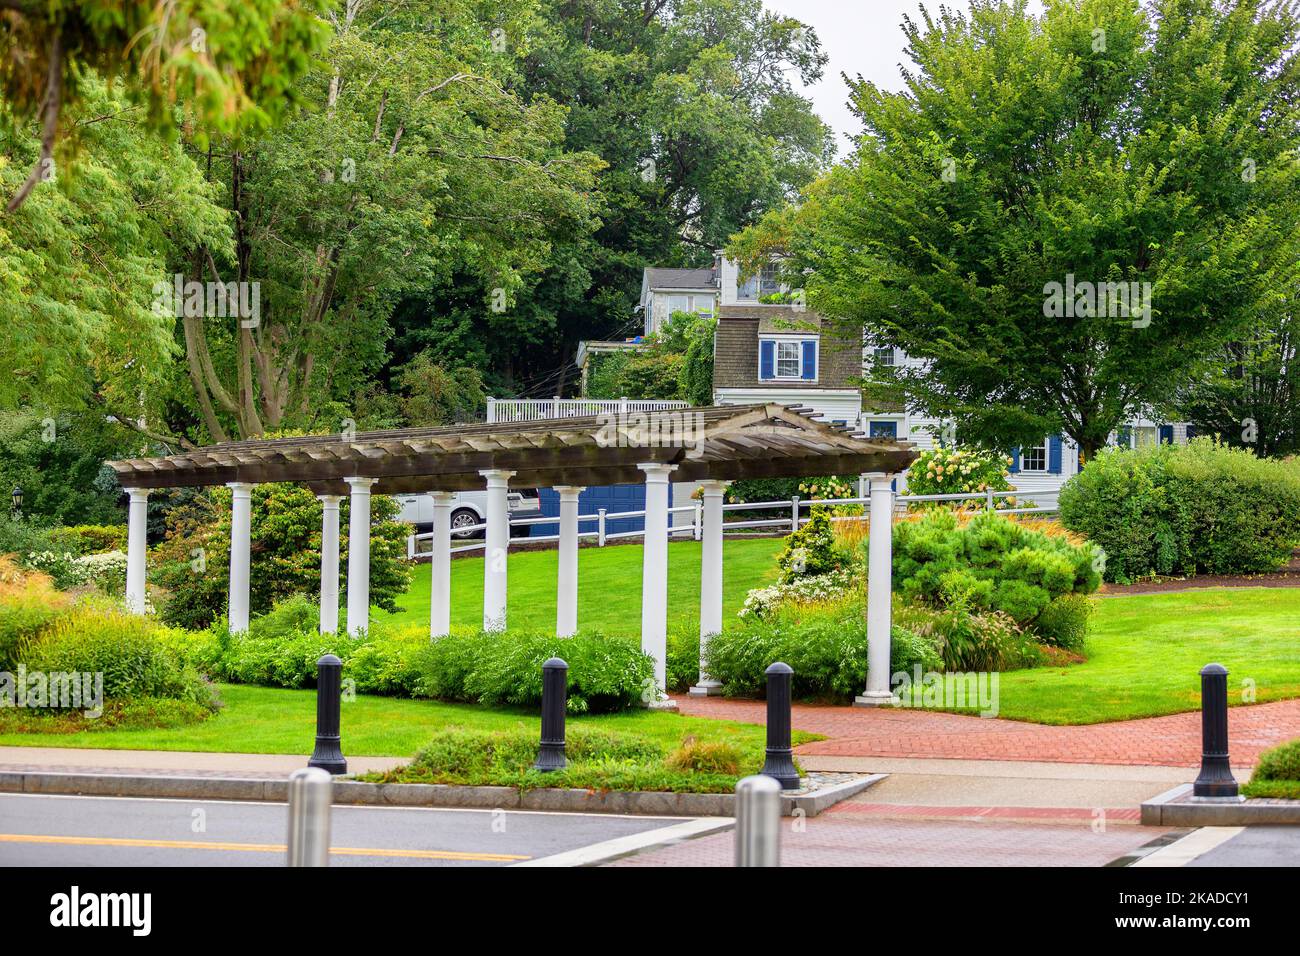 Entrance arbor into Brewster Gardens a public park across from the waterfront in Plymouth Massachusetts. Stock Photo